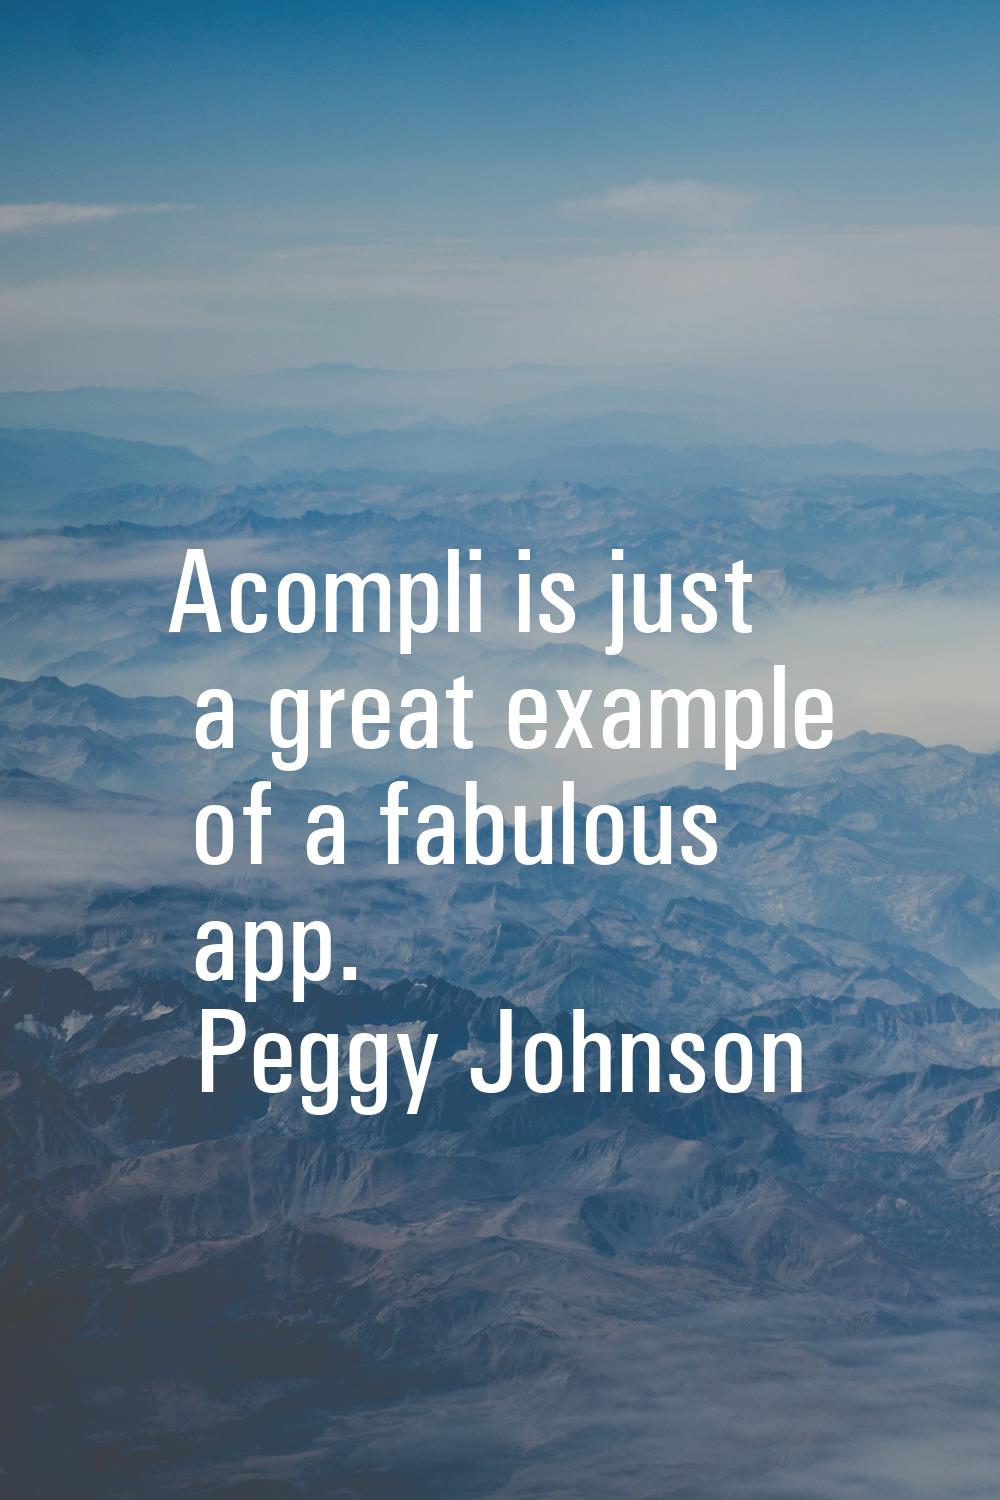 Acompli is just a great example of a fabulous app.